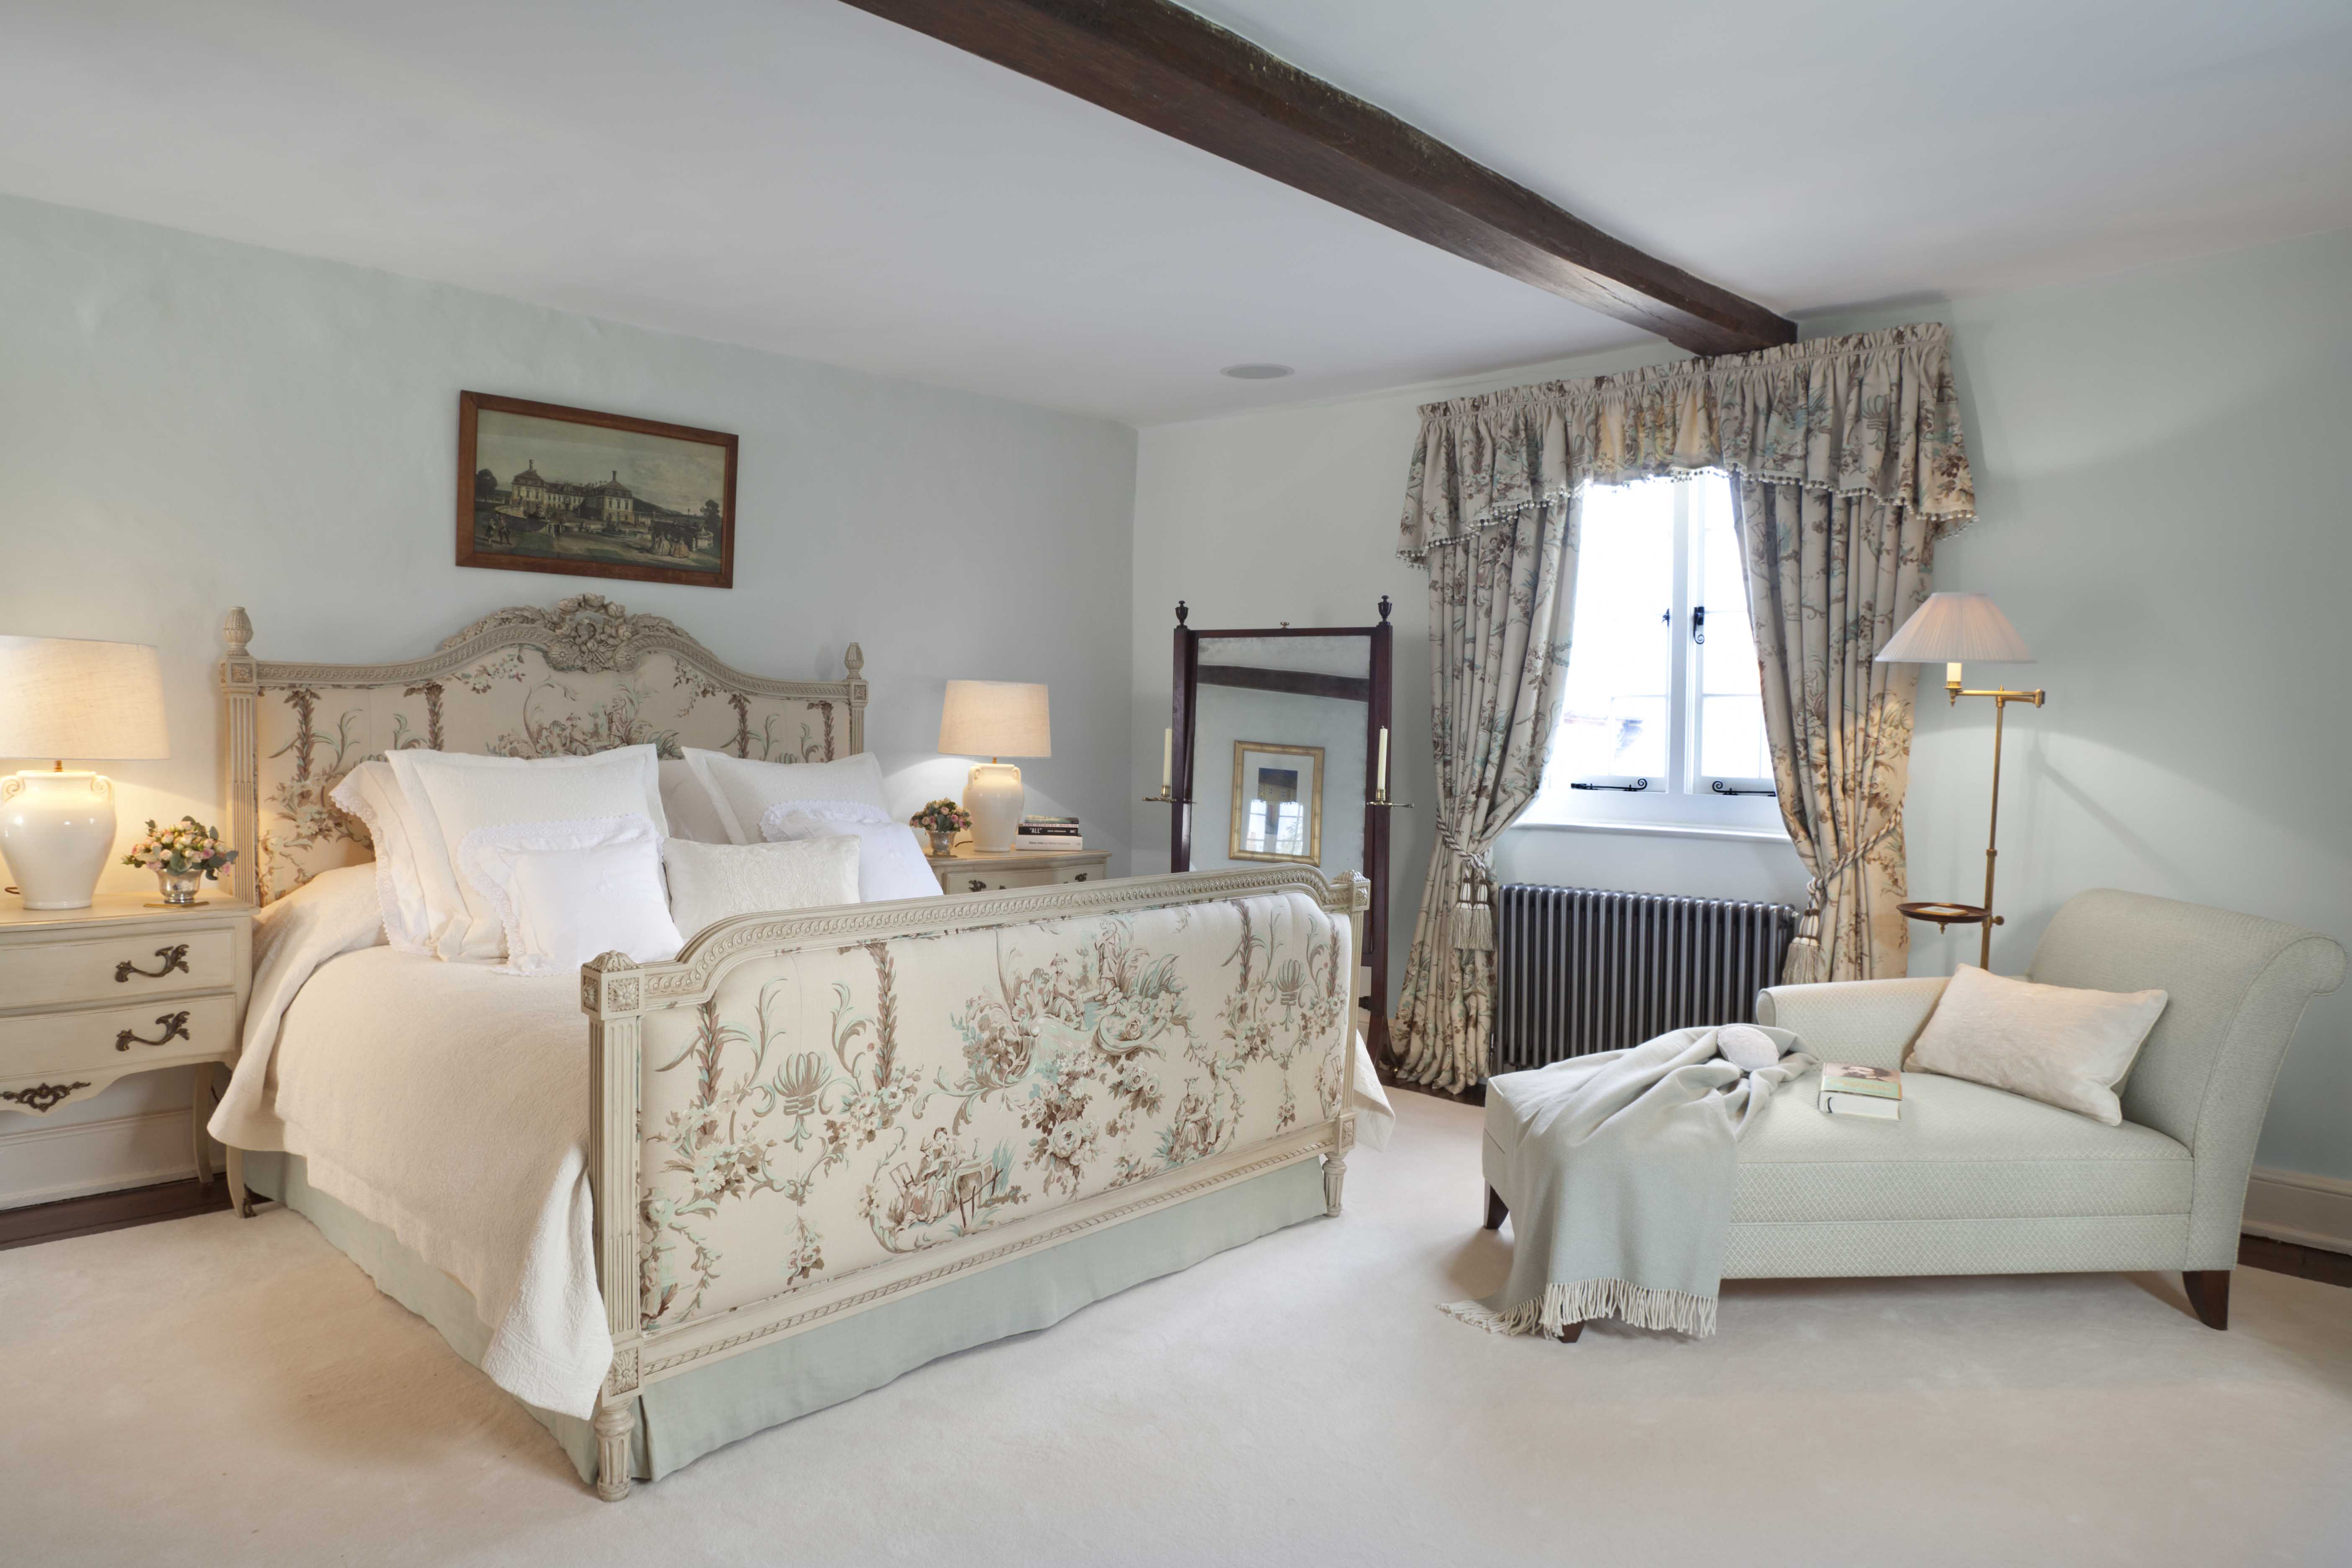 A beautiful bedroom in a soft duck egg and cream colour scheme and romantic coloured toile.